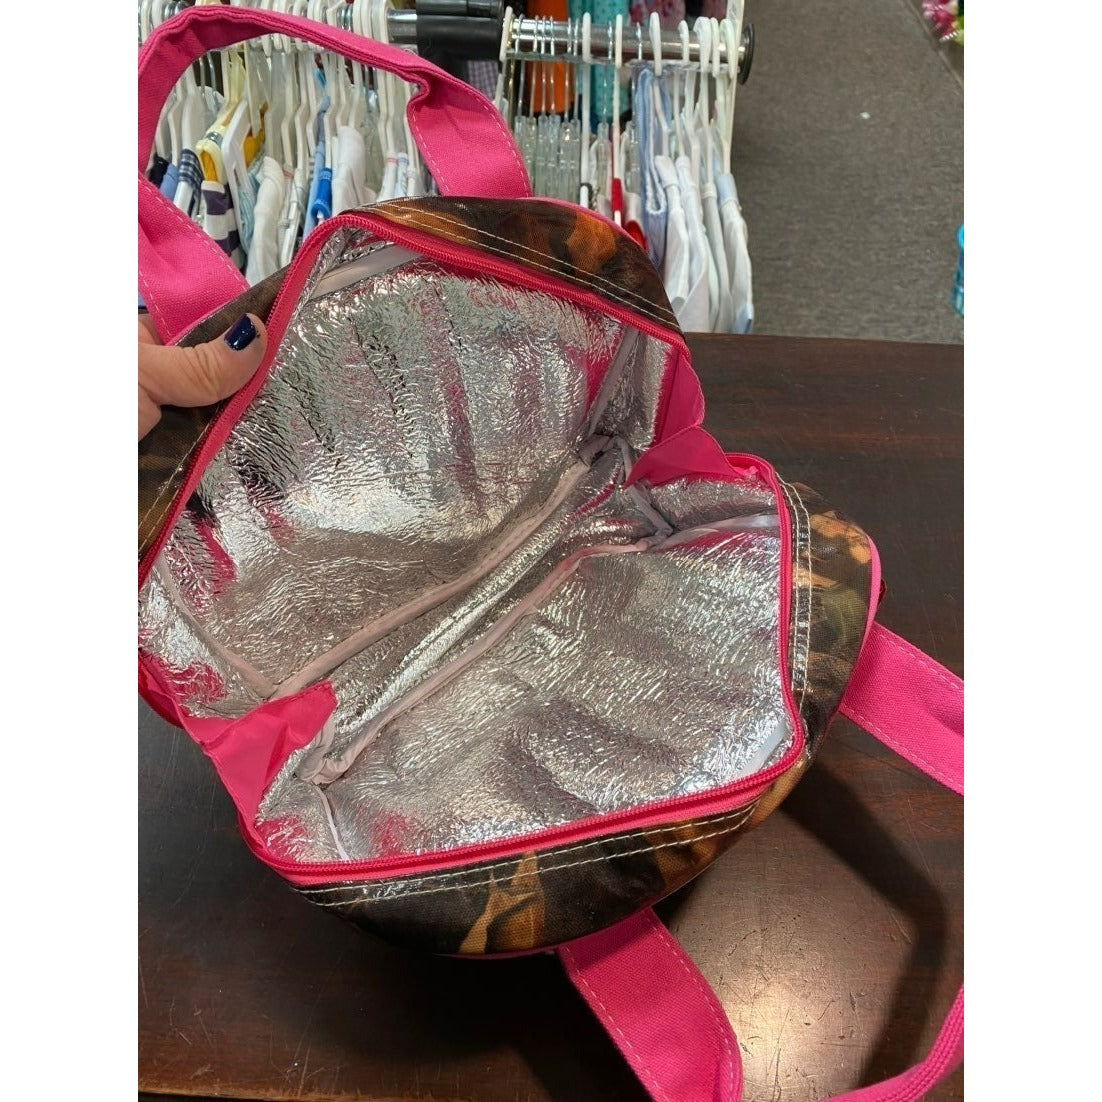 New pink camo woods lunch tote